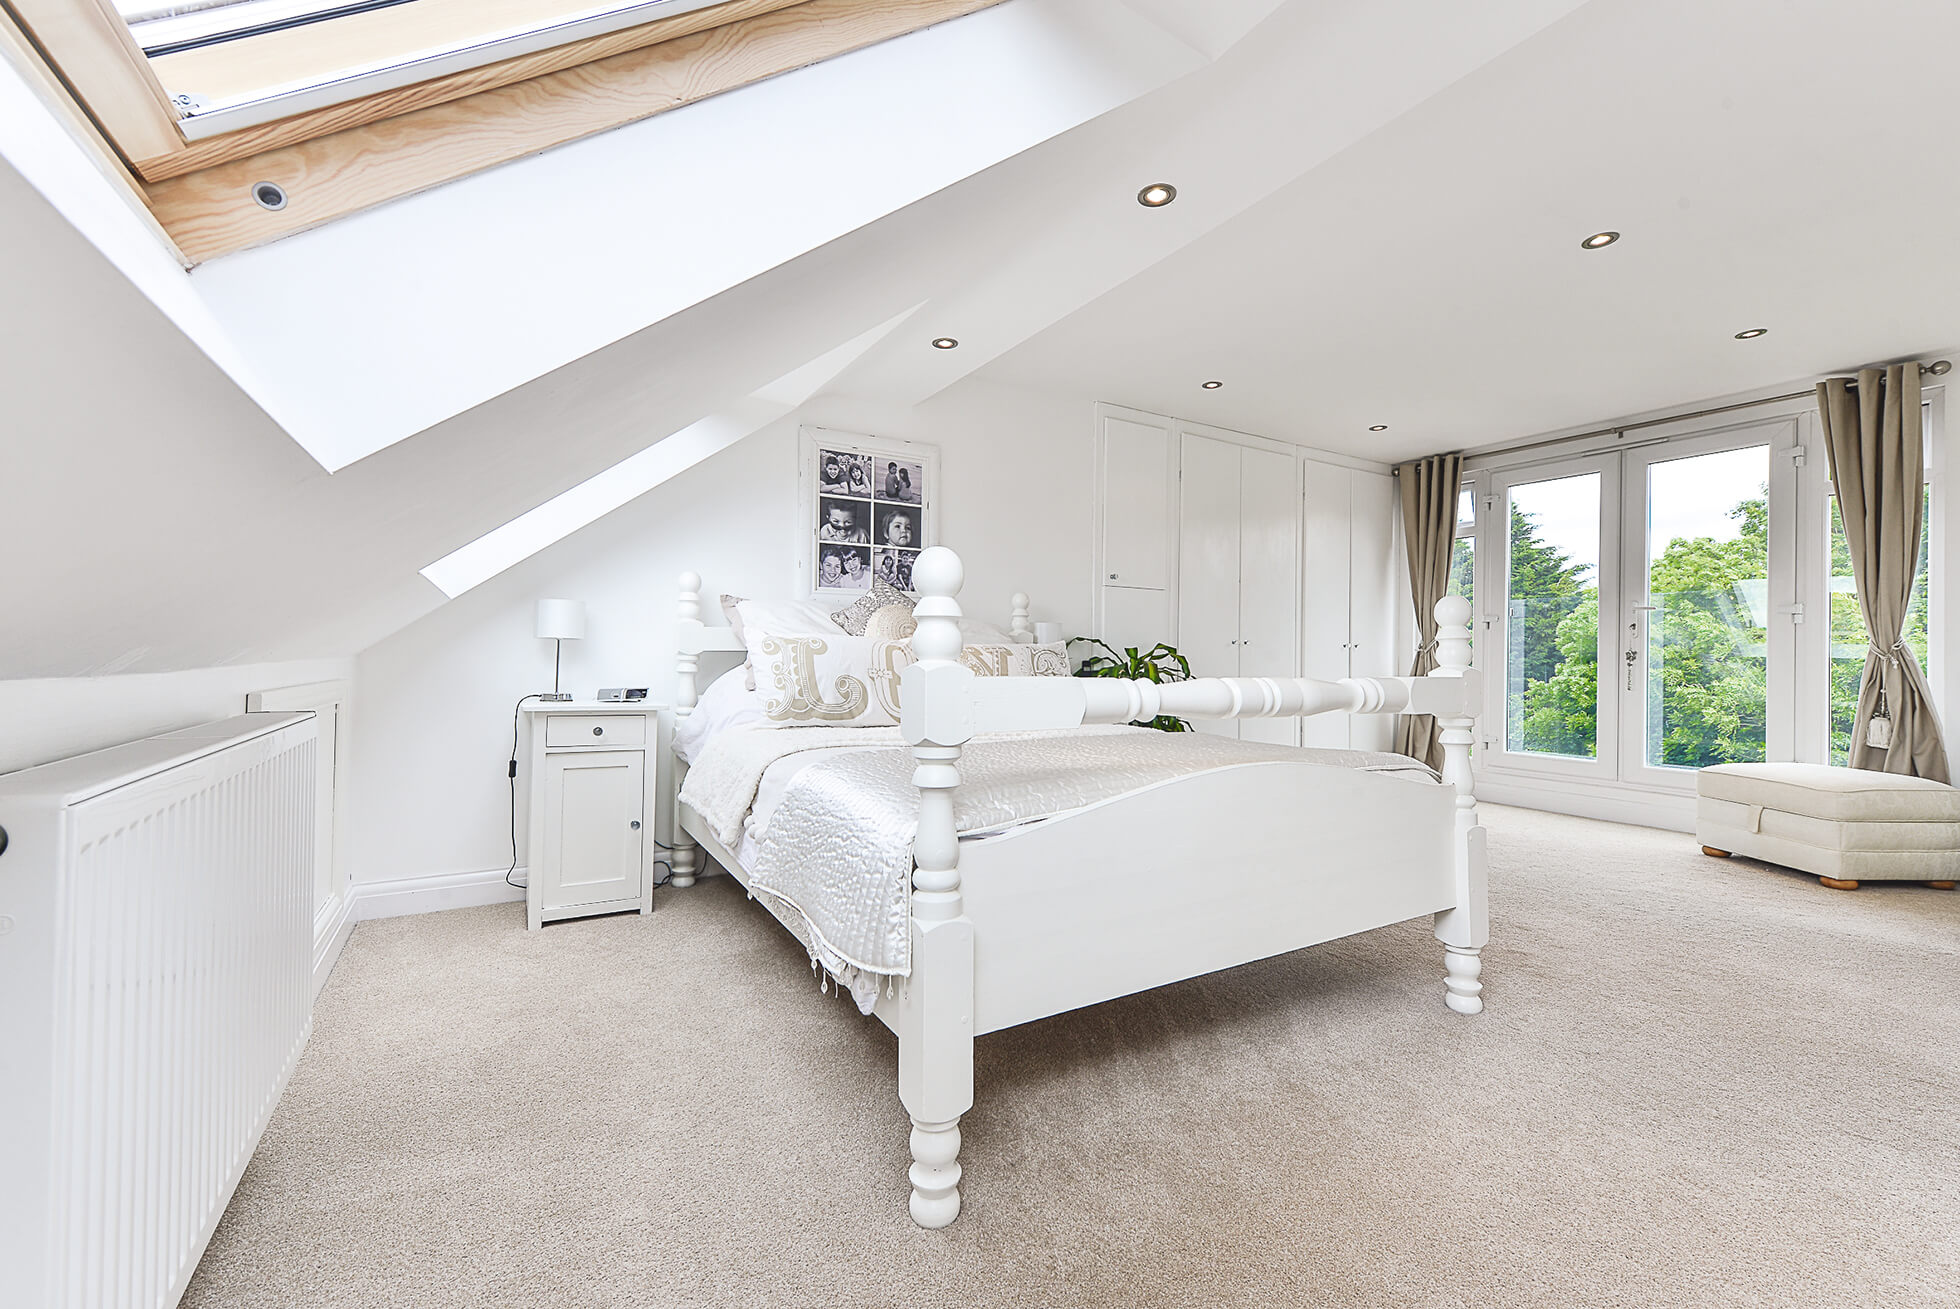 Do you have a question about converting your Loft in Royston? Here are the most popular questions asked by our clients.